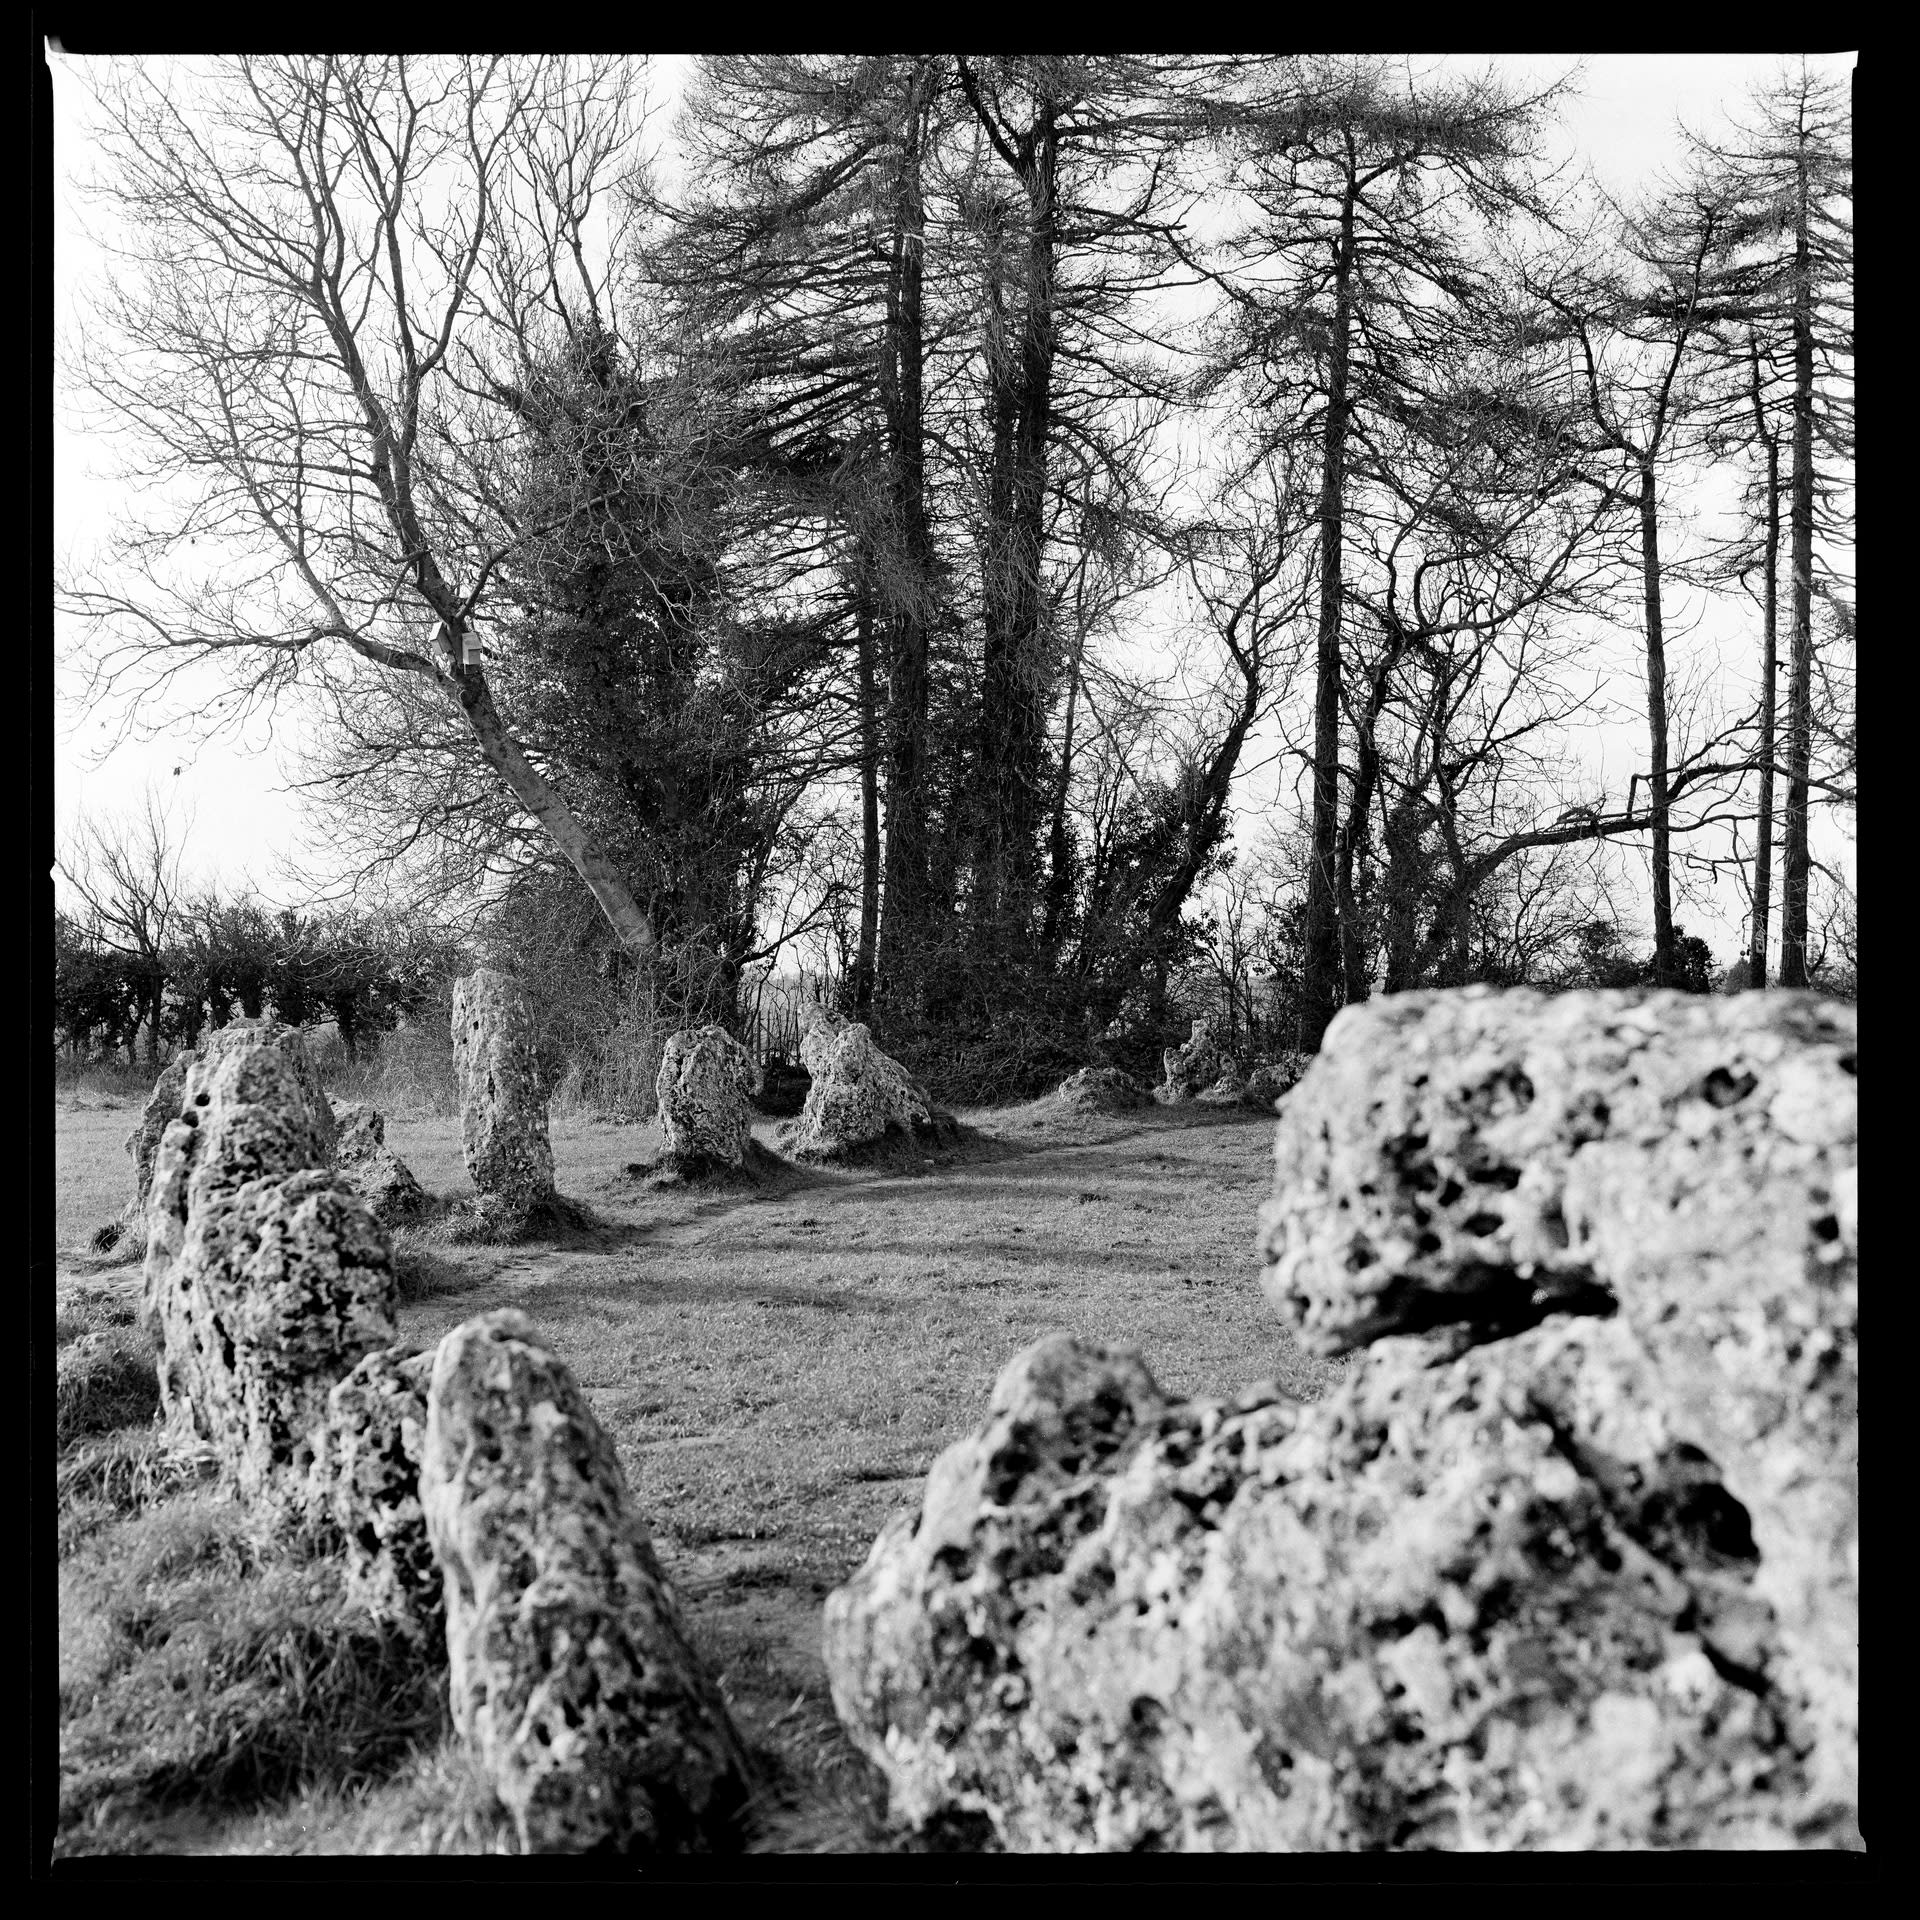 half of a standing stone circle in a field of grass. Tall trees stand behind. Black and white photograph.